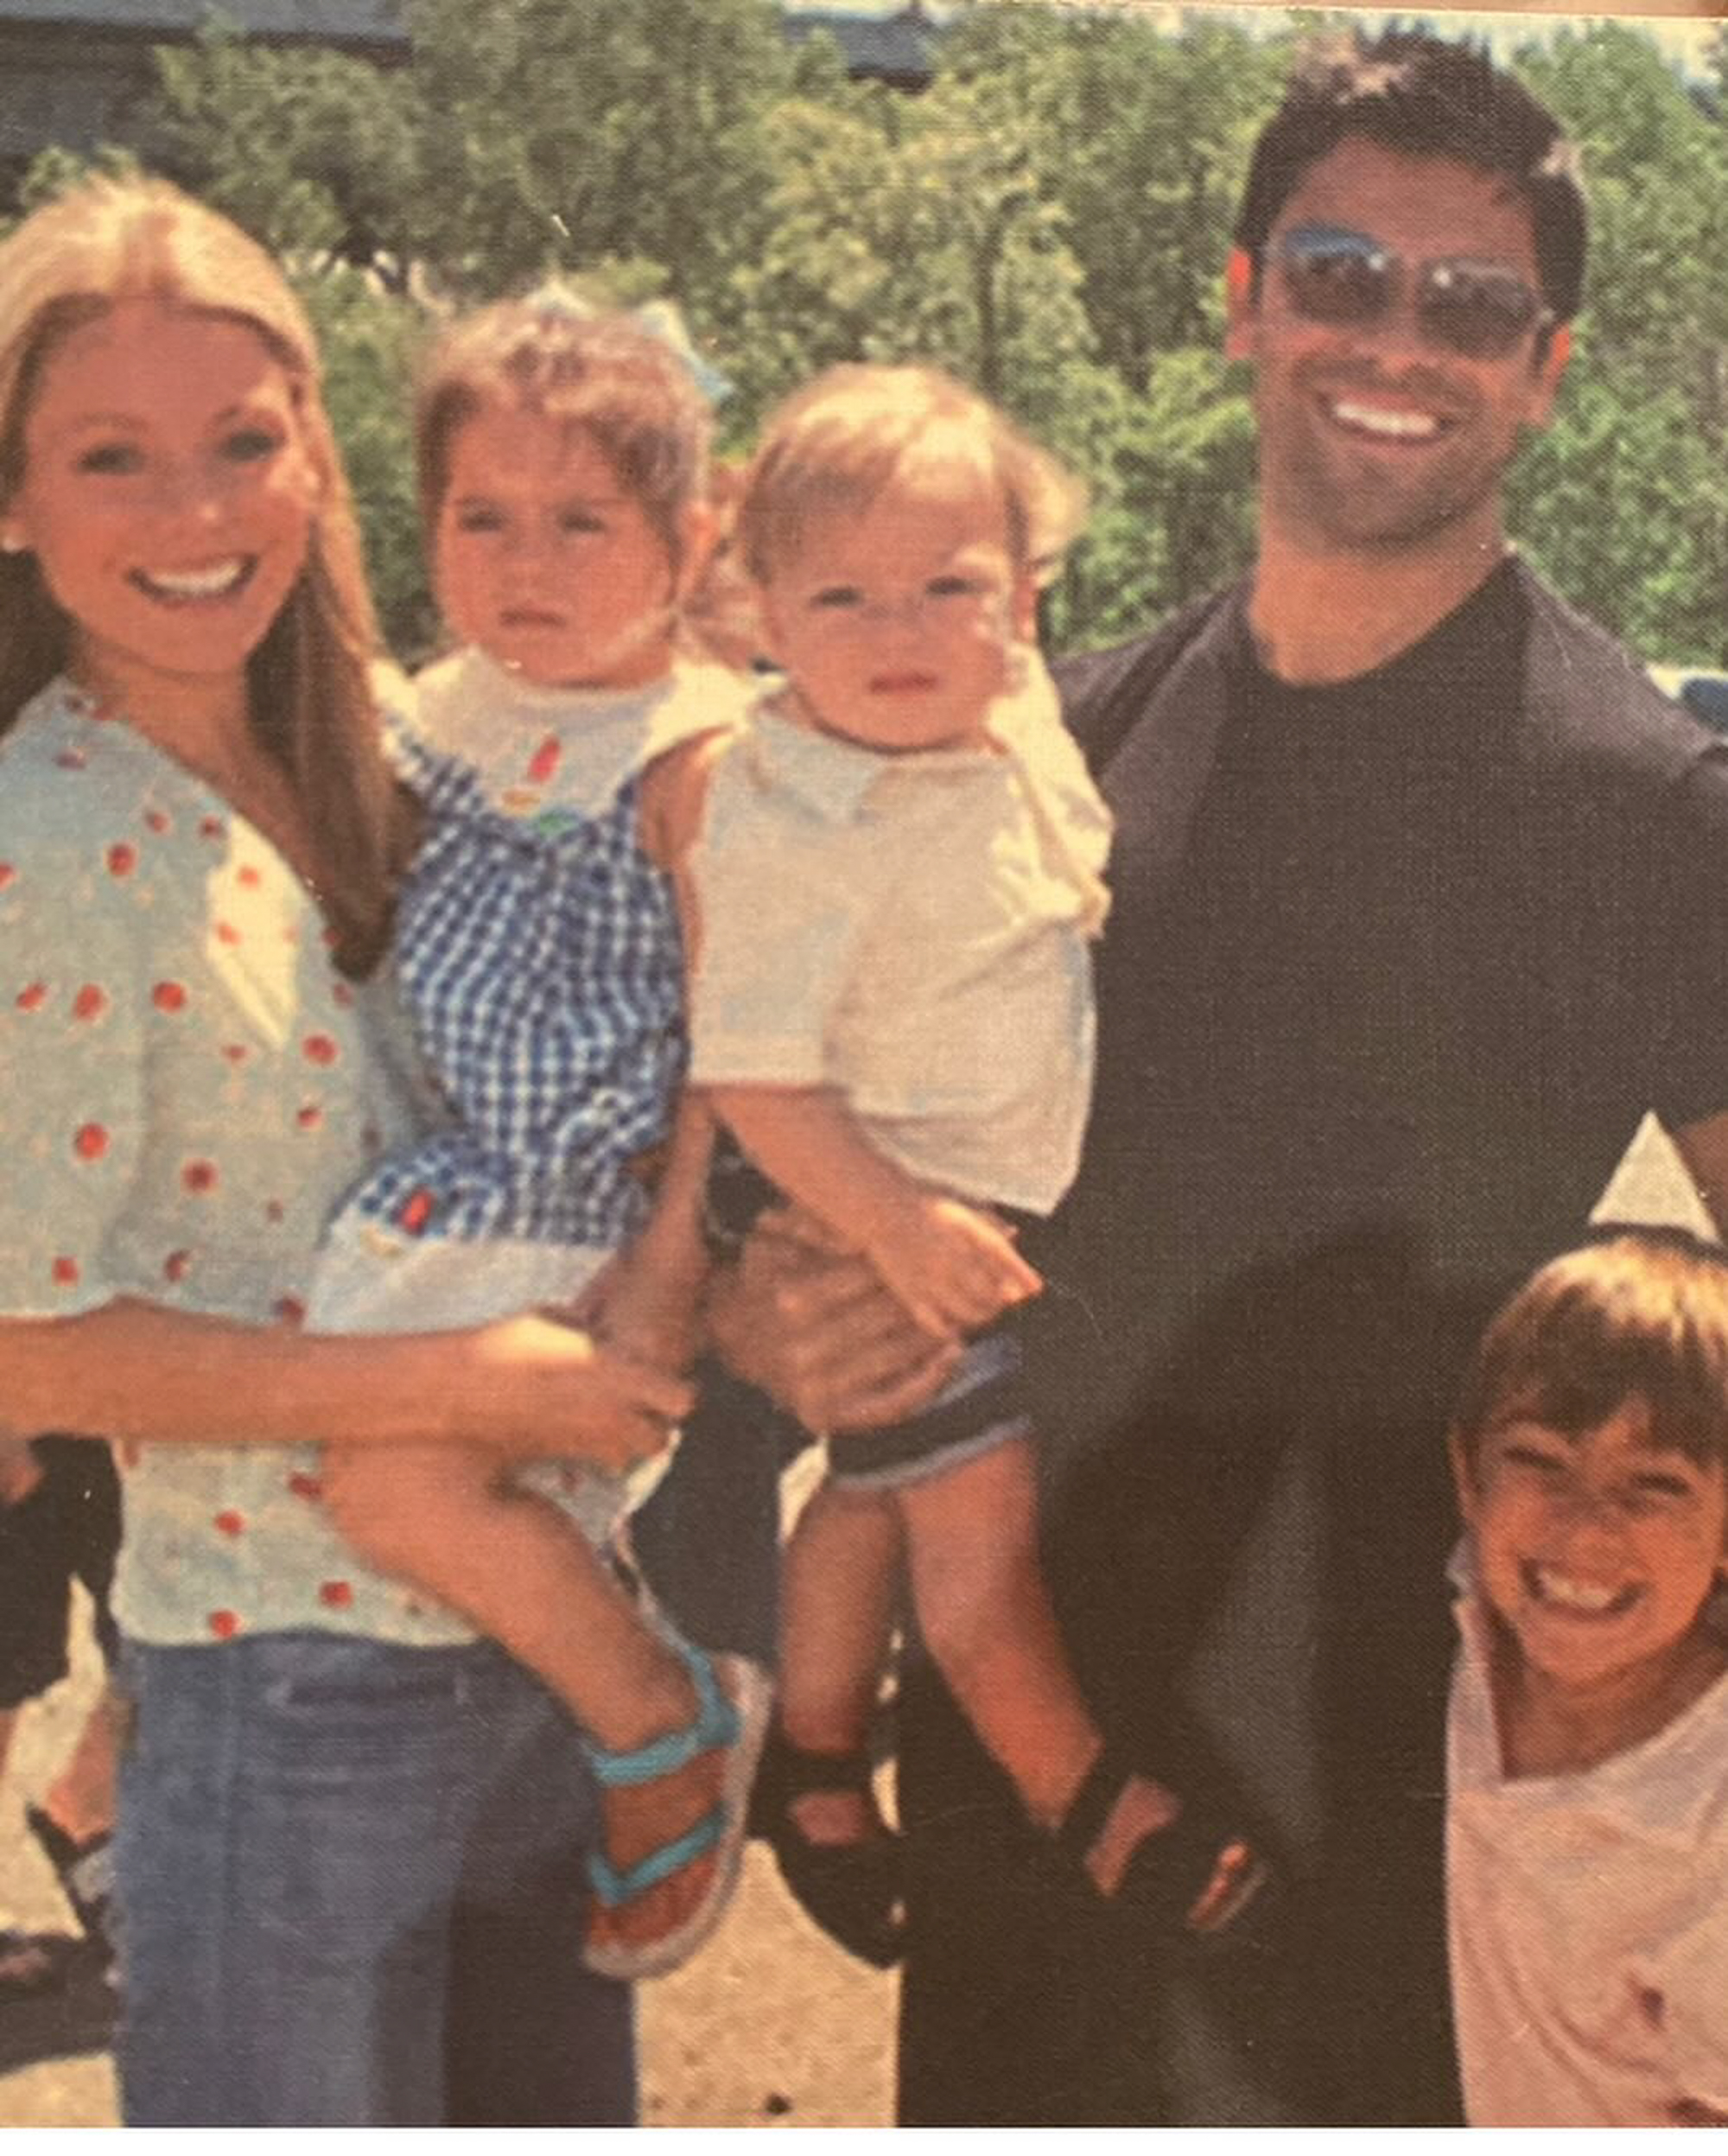 A throwback photo of Kelly Ripa and Mark Consuelos posing with their kids